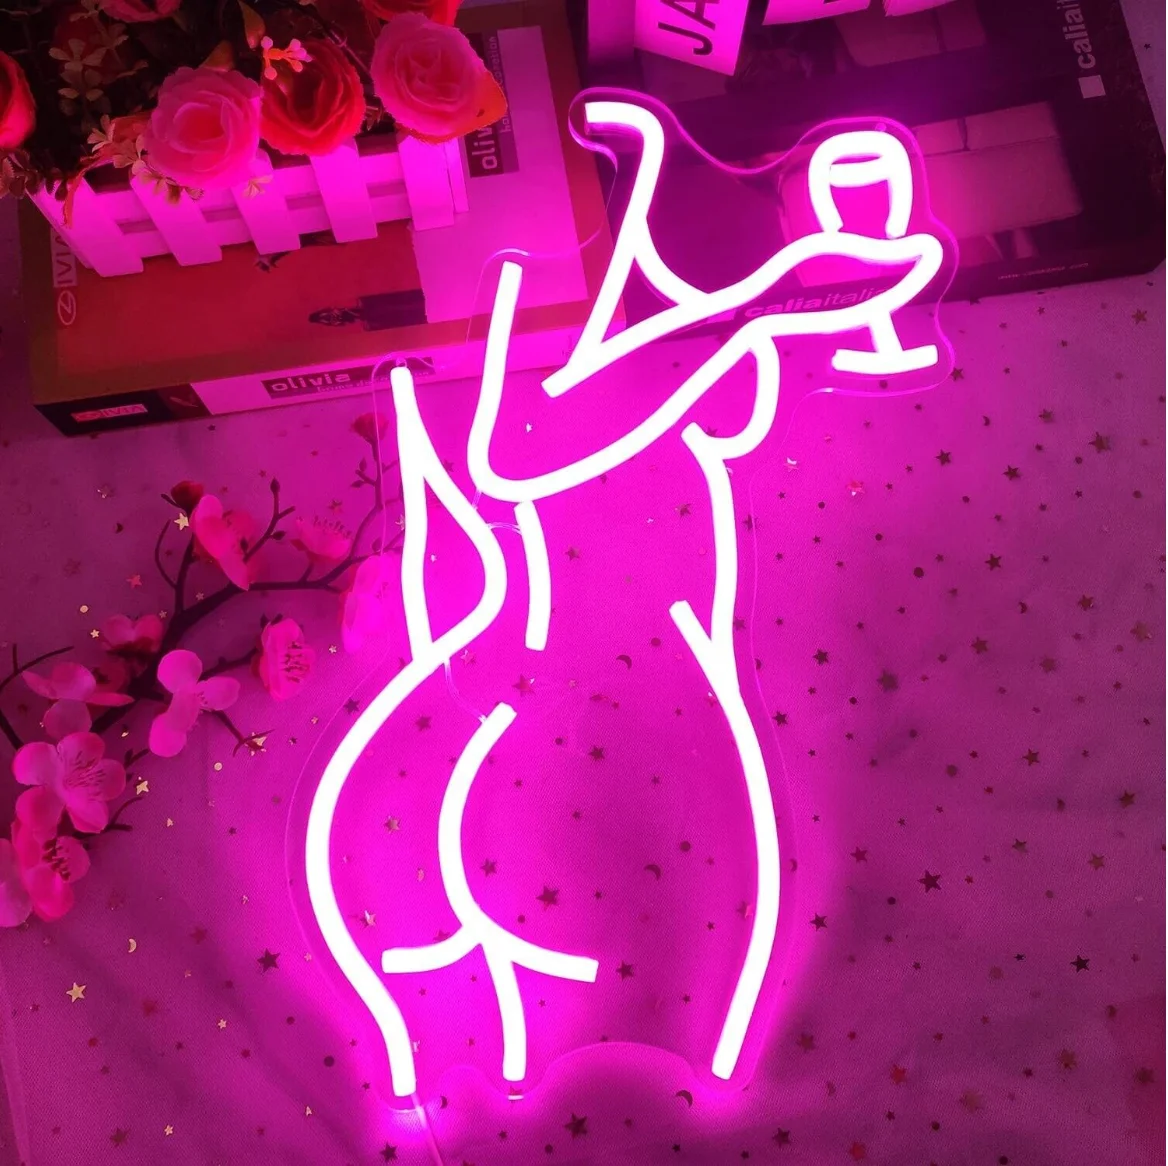 Ajoyferris Women's Back Neon Sign Adjustable LED Women's Neon Sign Neon Pink Sign Women's all you need is love lashes neon sign all you need is love lashes led sign neon sign bedroom led neon sign neon decorations pink